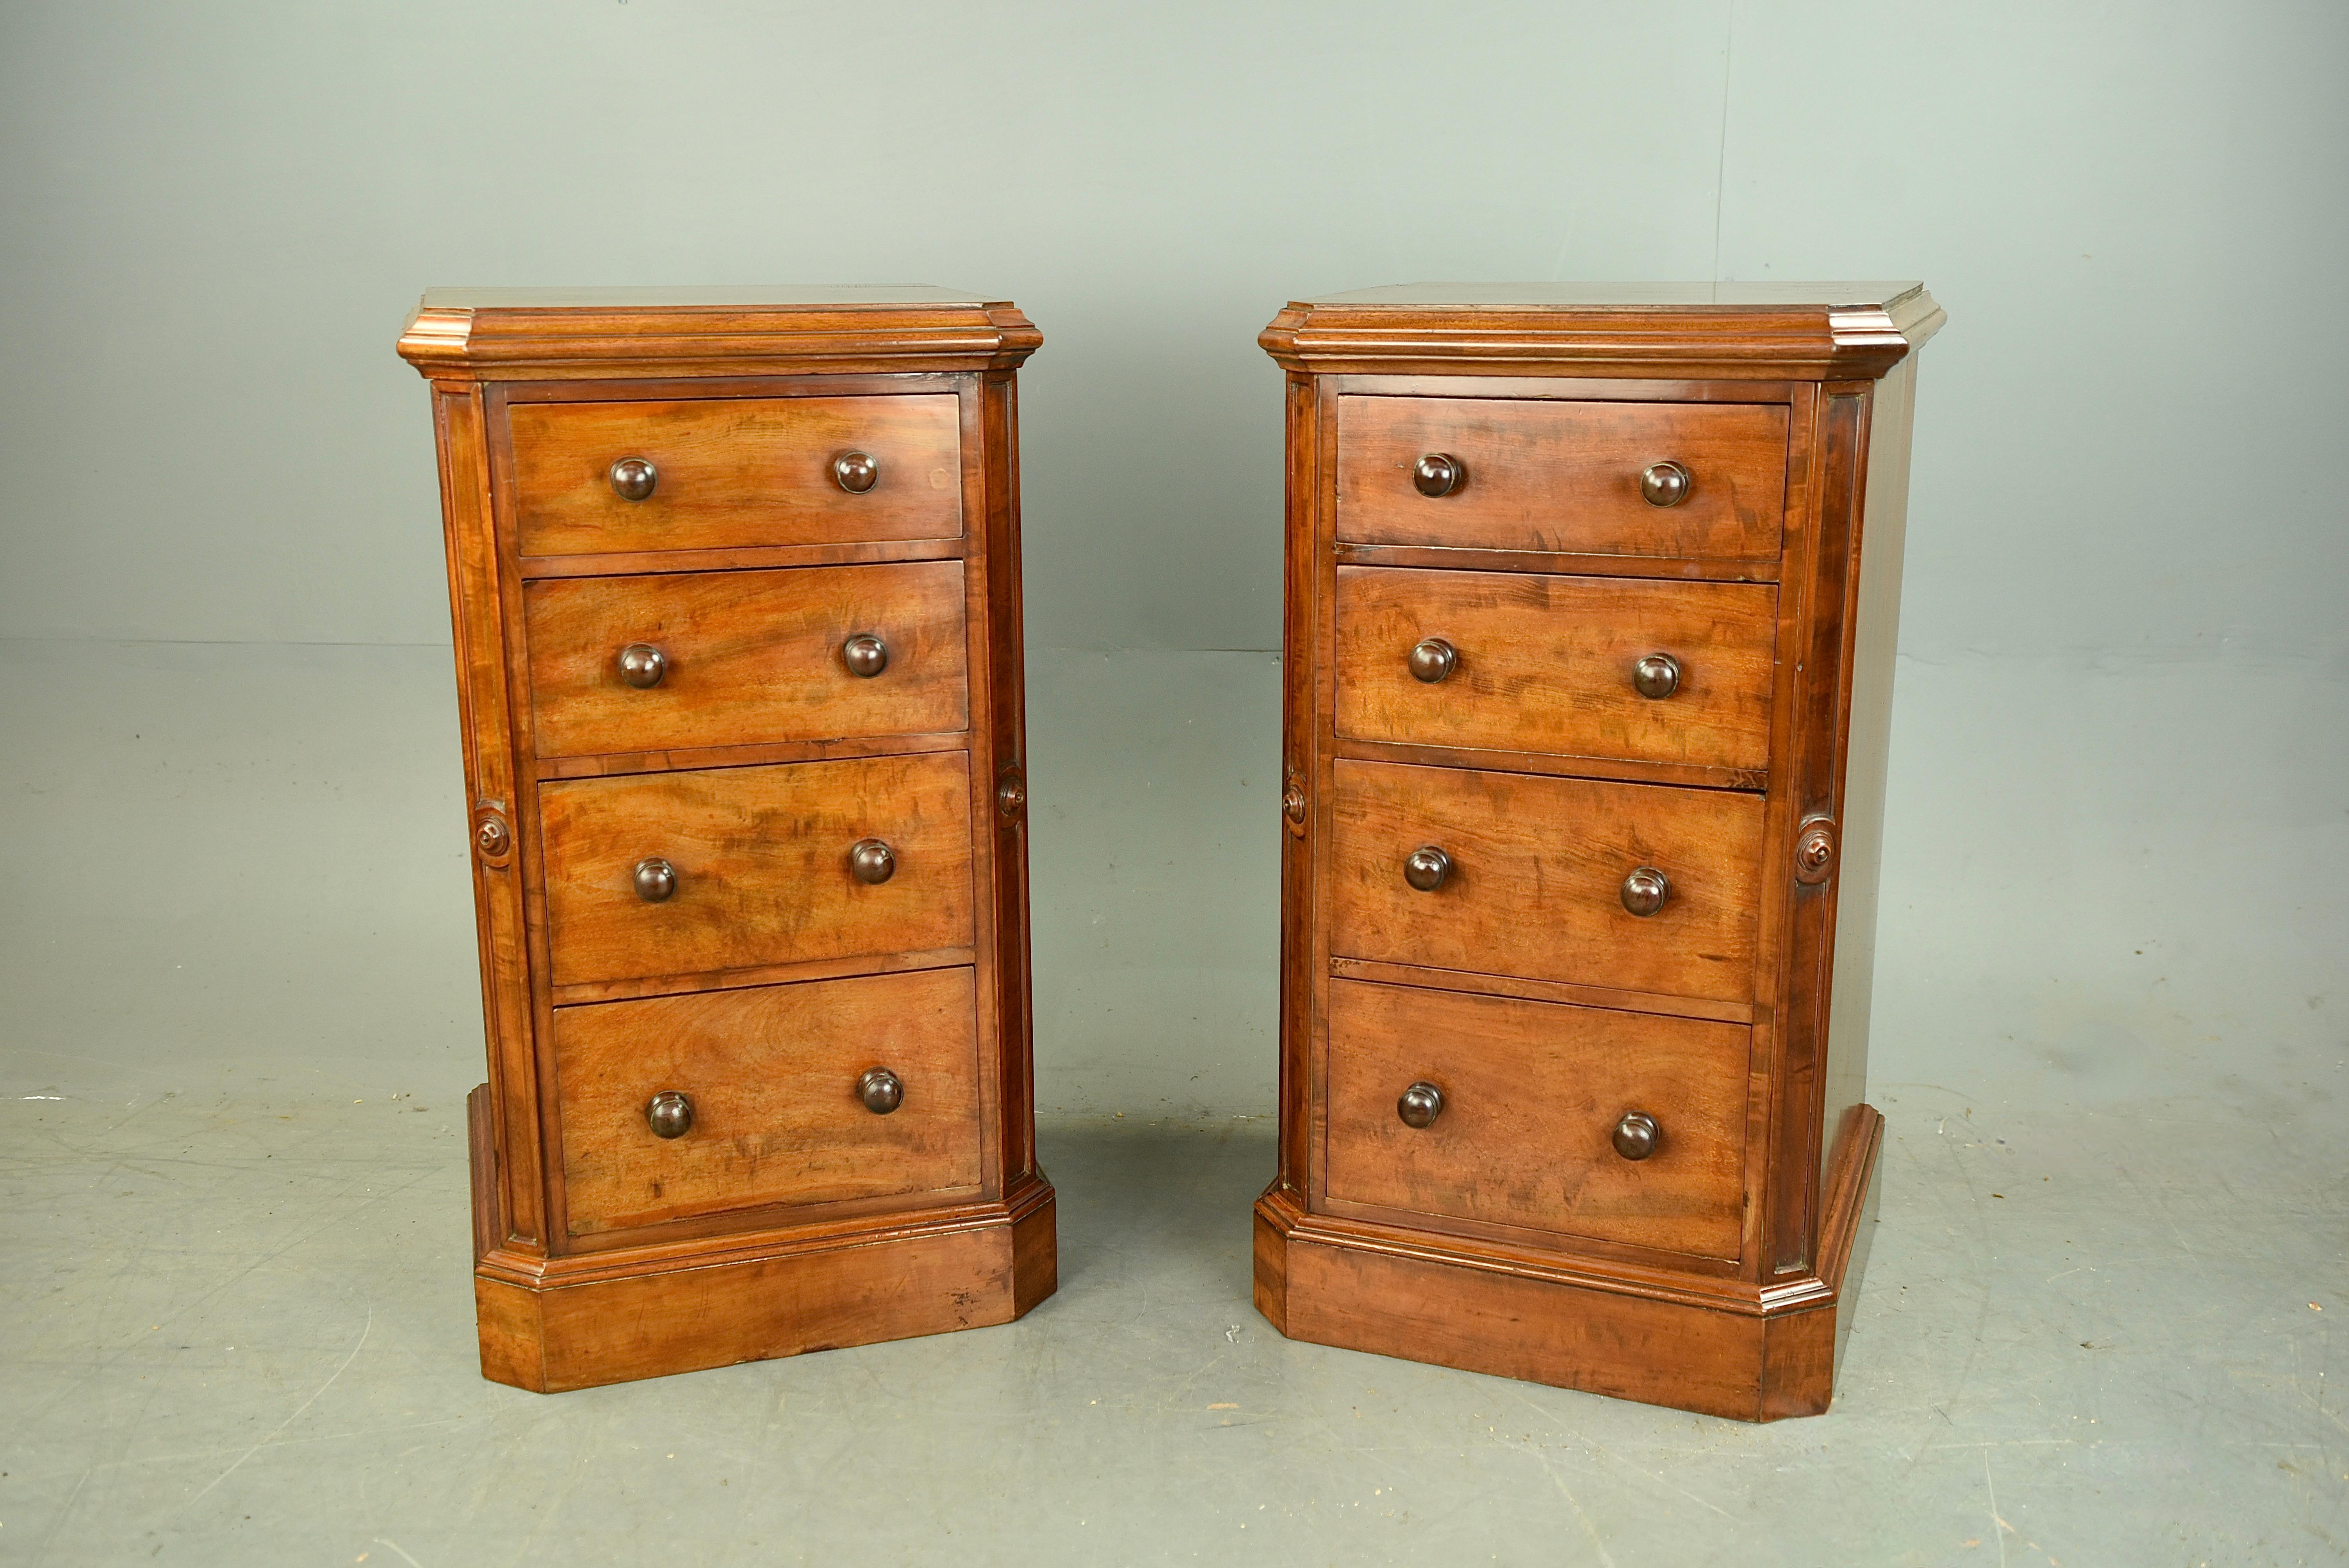 Fine Quality pair of late Regency early Victorian mahogany chests of drawers circa 1840 .
The chests have been made using the finest mahogany available of the period with a wonderful grain and colour ,the tops have wonderful moulded edges and a very